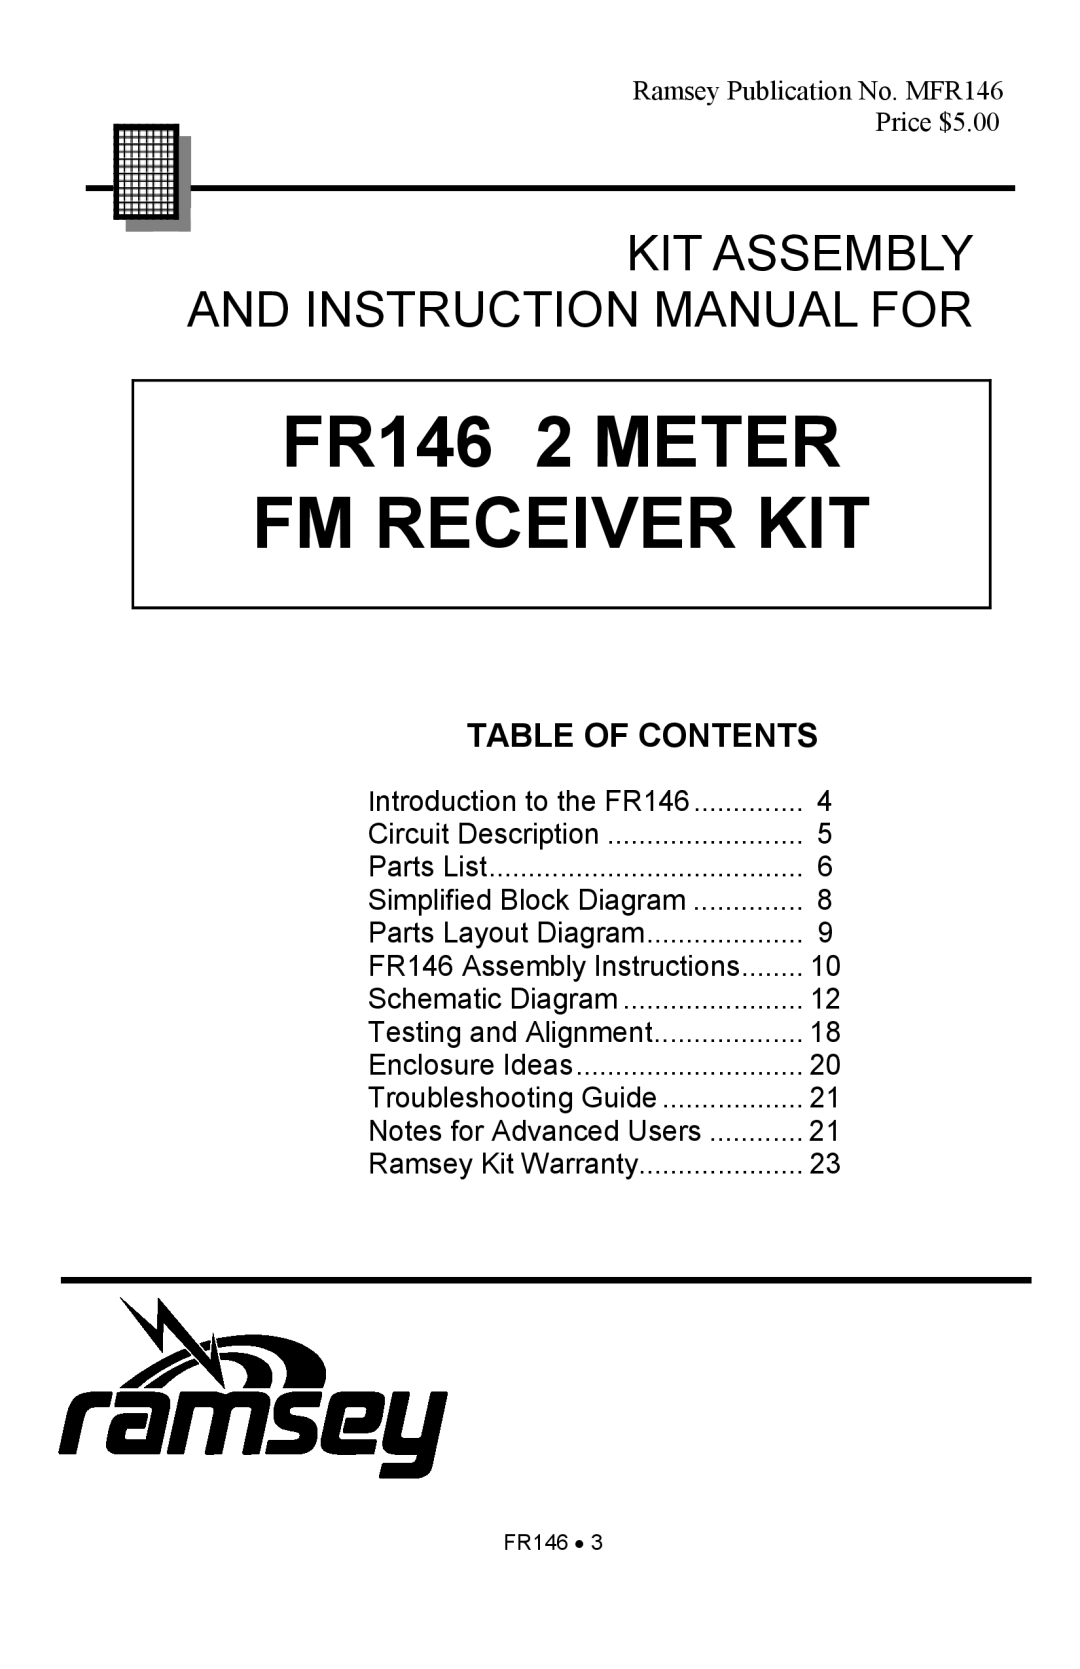 Ramsey Electronics manual FR146 2 METER FM RECEIVER KIT, Table Of Contents, Kit Assembly 